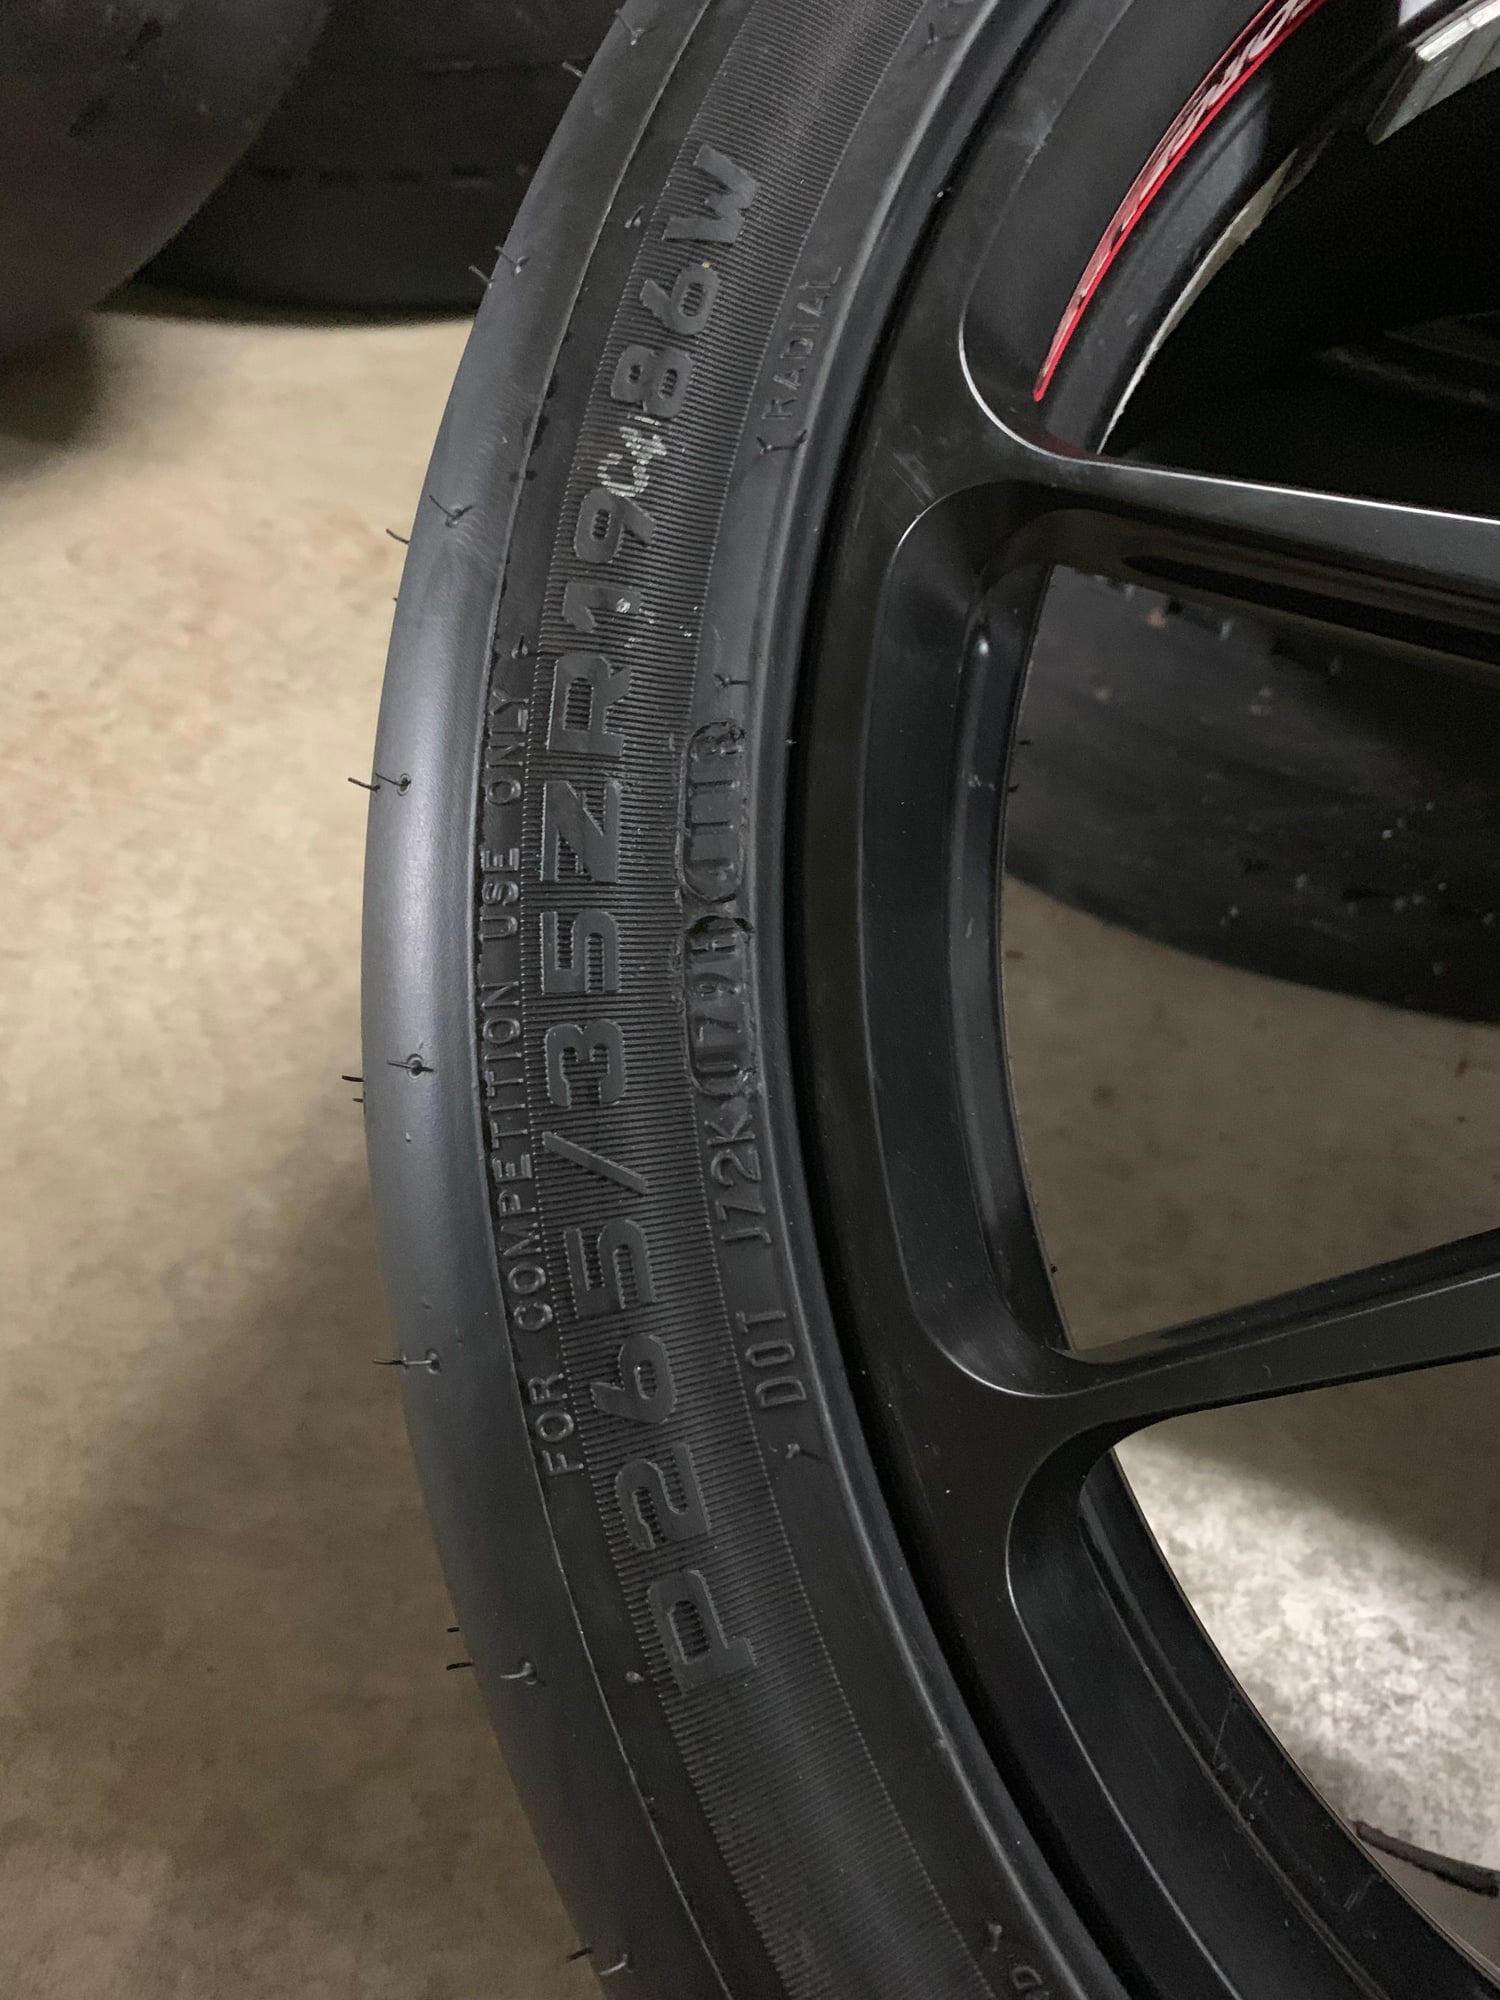 Wheels and Tires/Axles - New Hoosier R7 tires gt4 sizing - no wheels - New - Dallas, TX 75220, United States